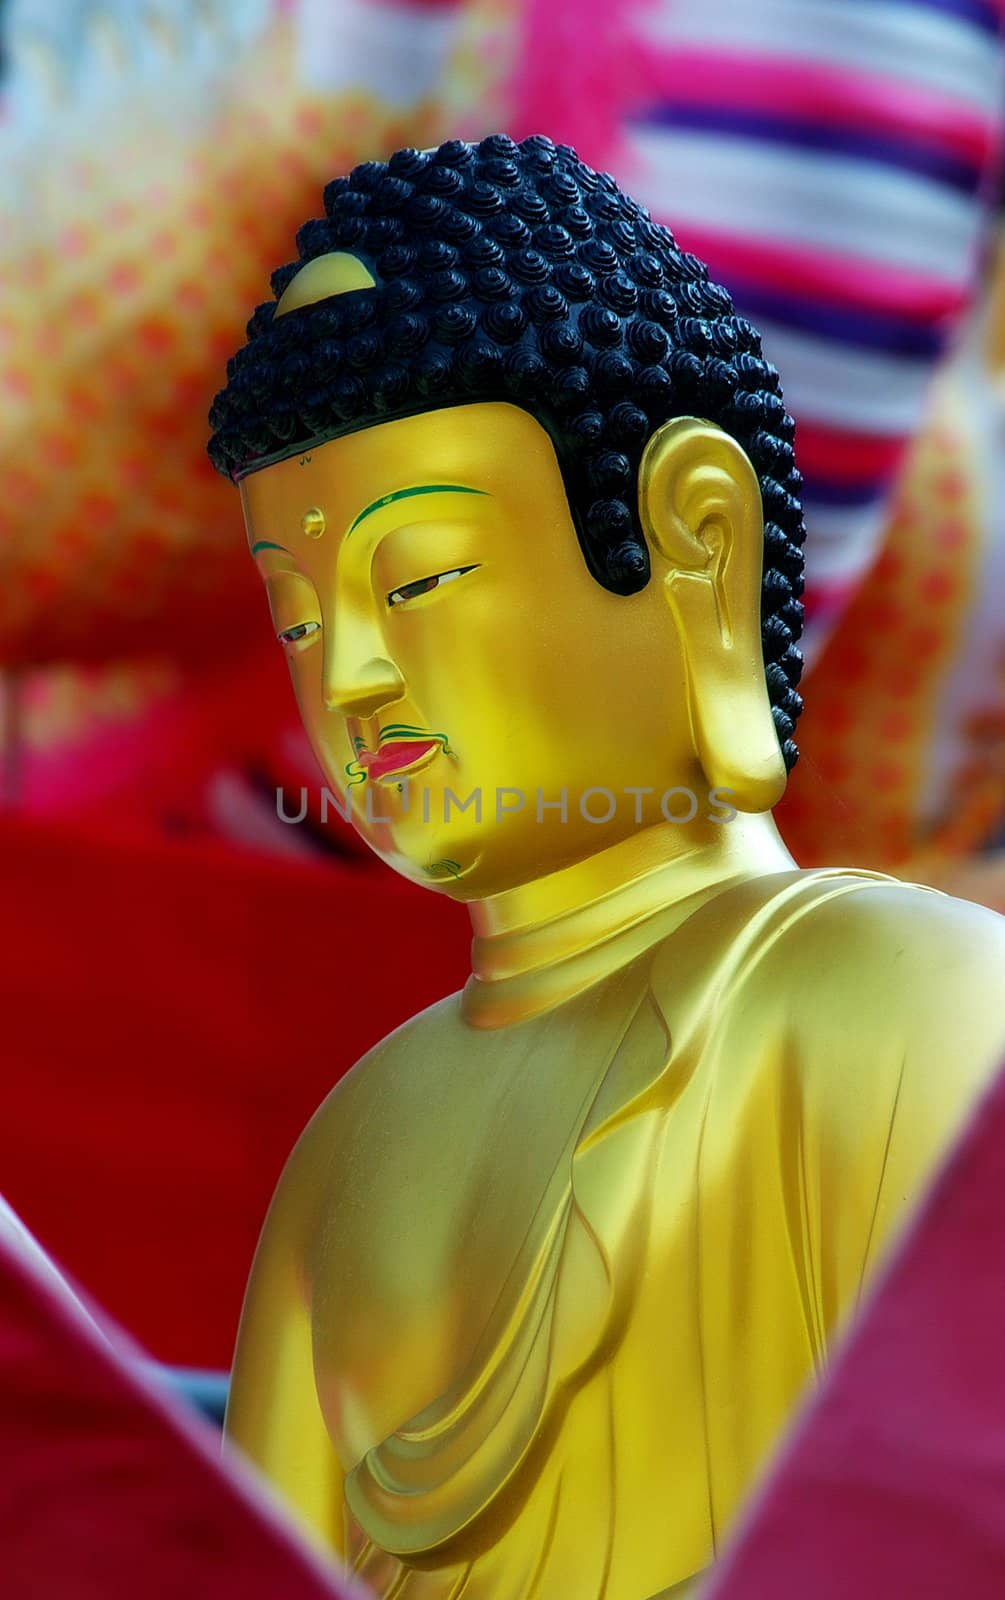 Golden Buddha by clickbeetle